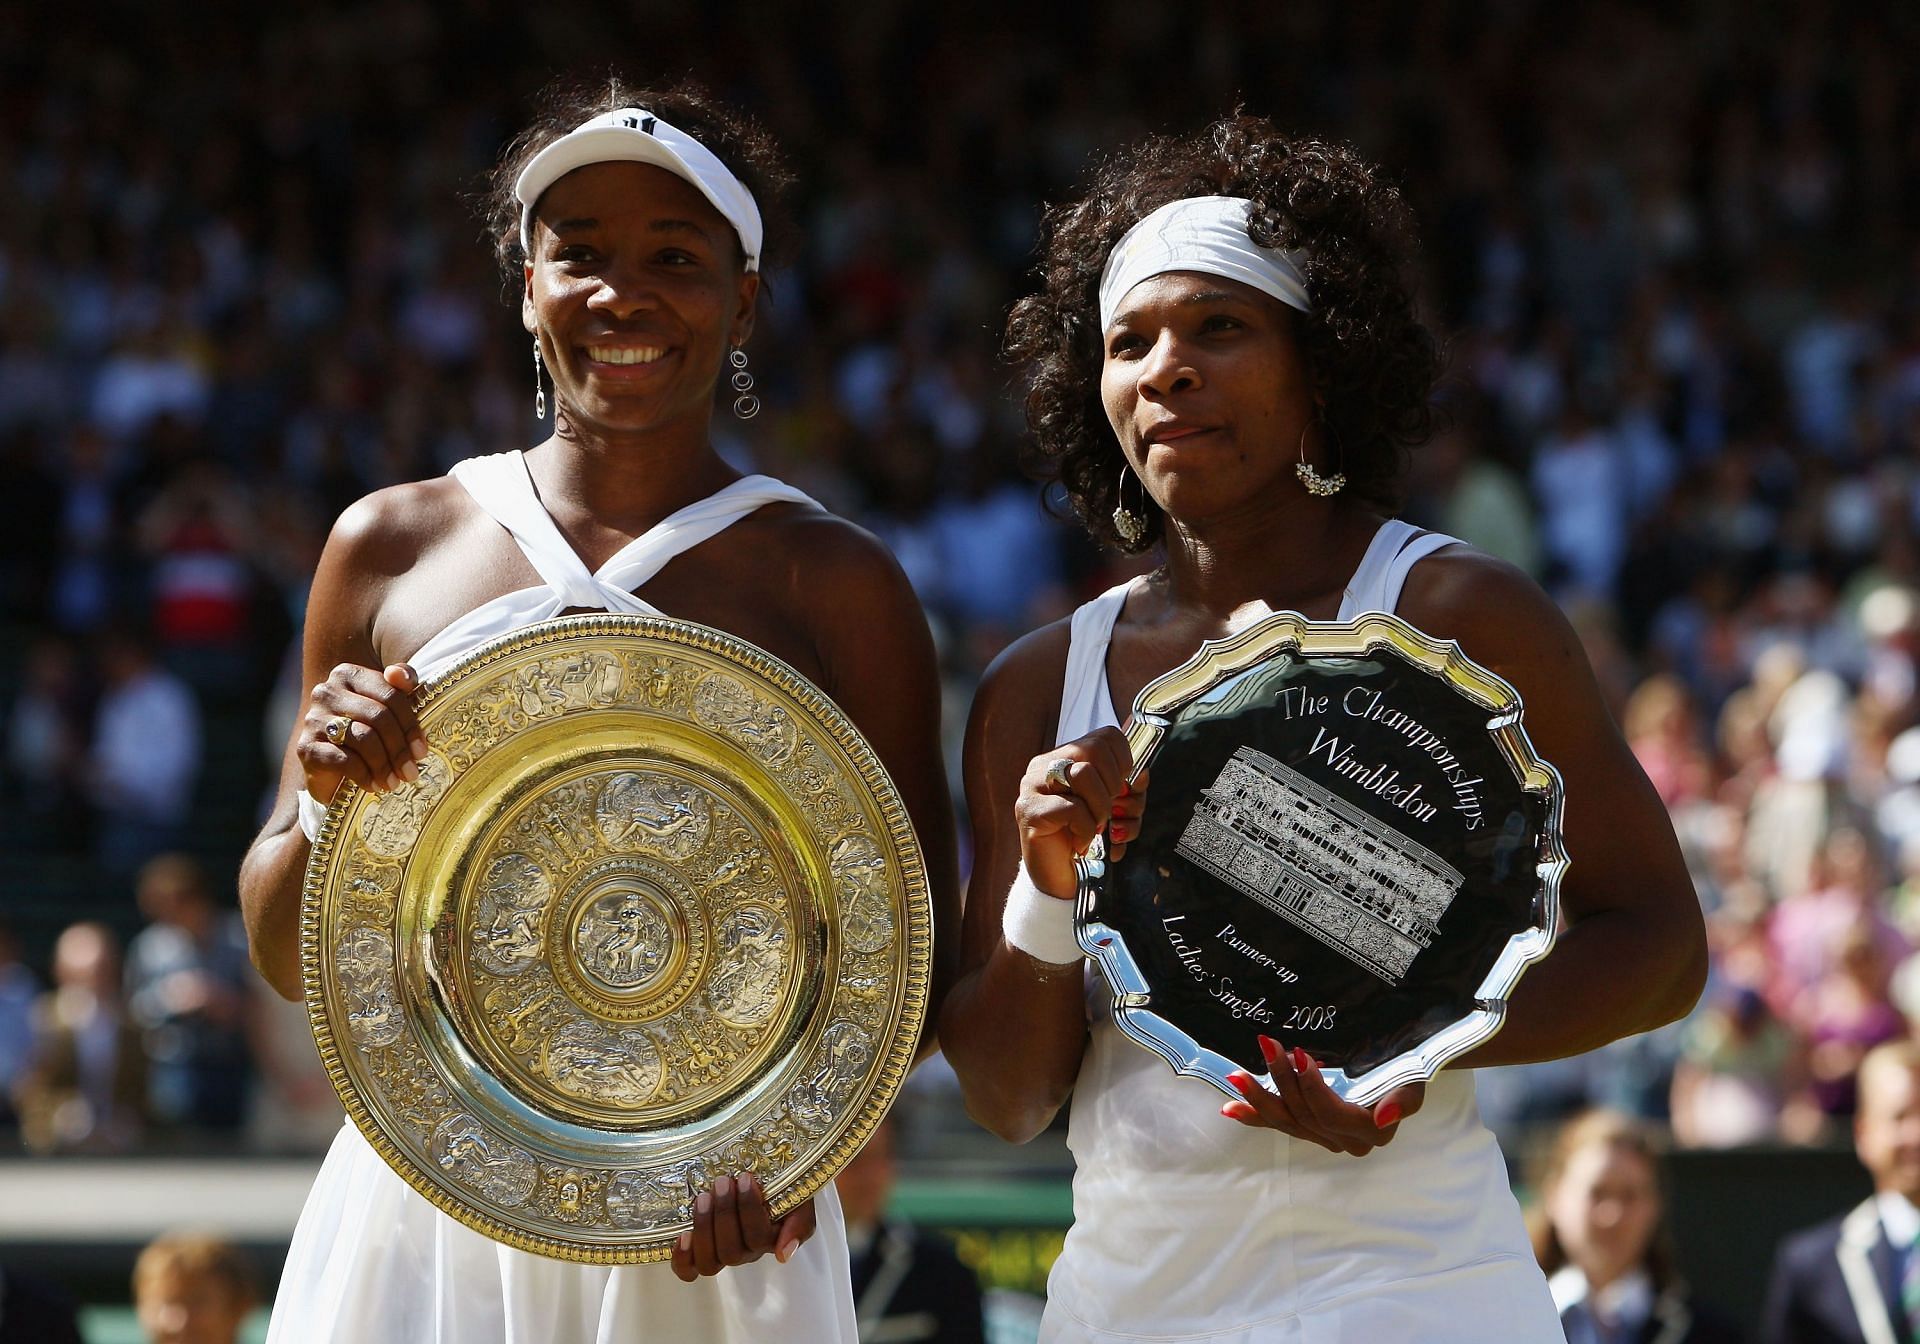 Venus Williams has won two out of the nine Grand Slam finals she has played against Serena Williams